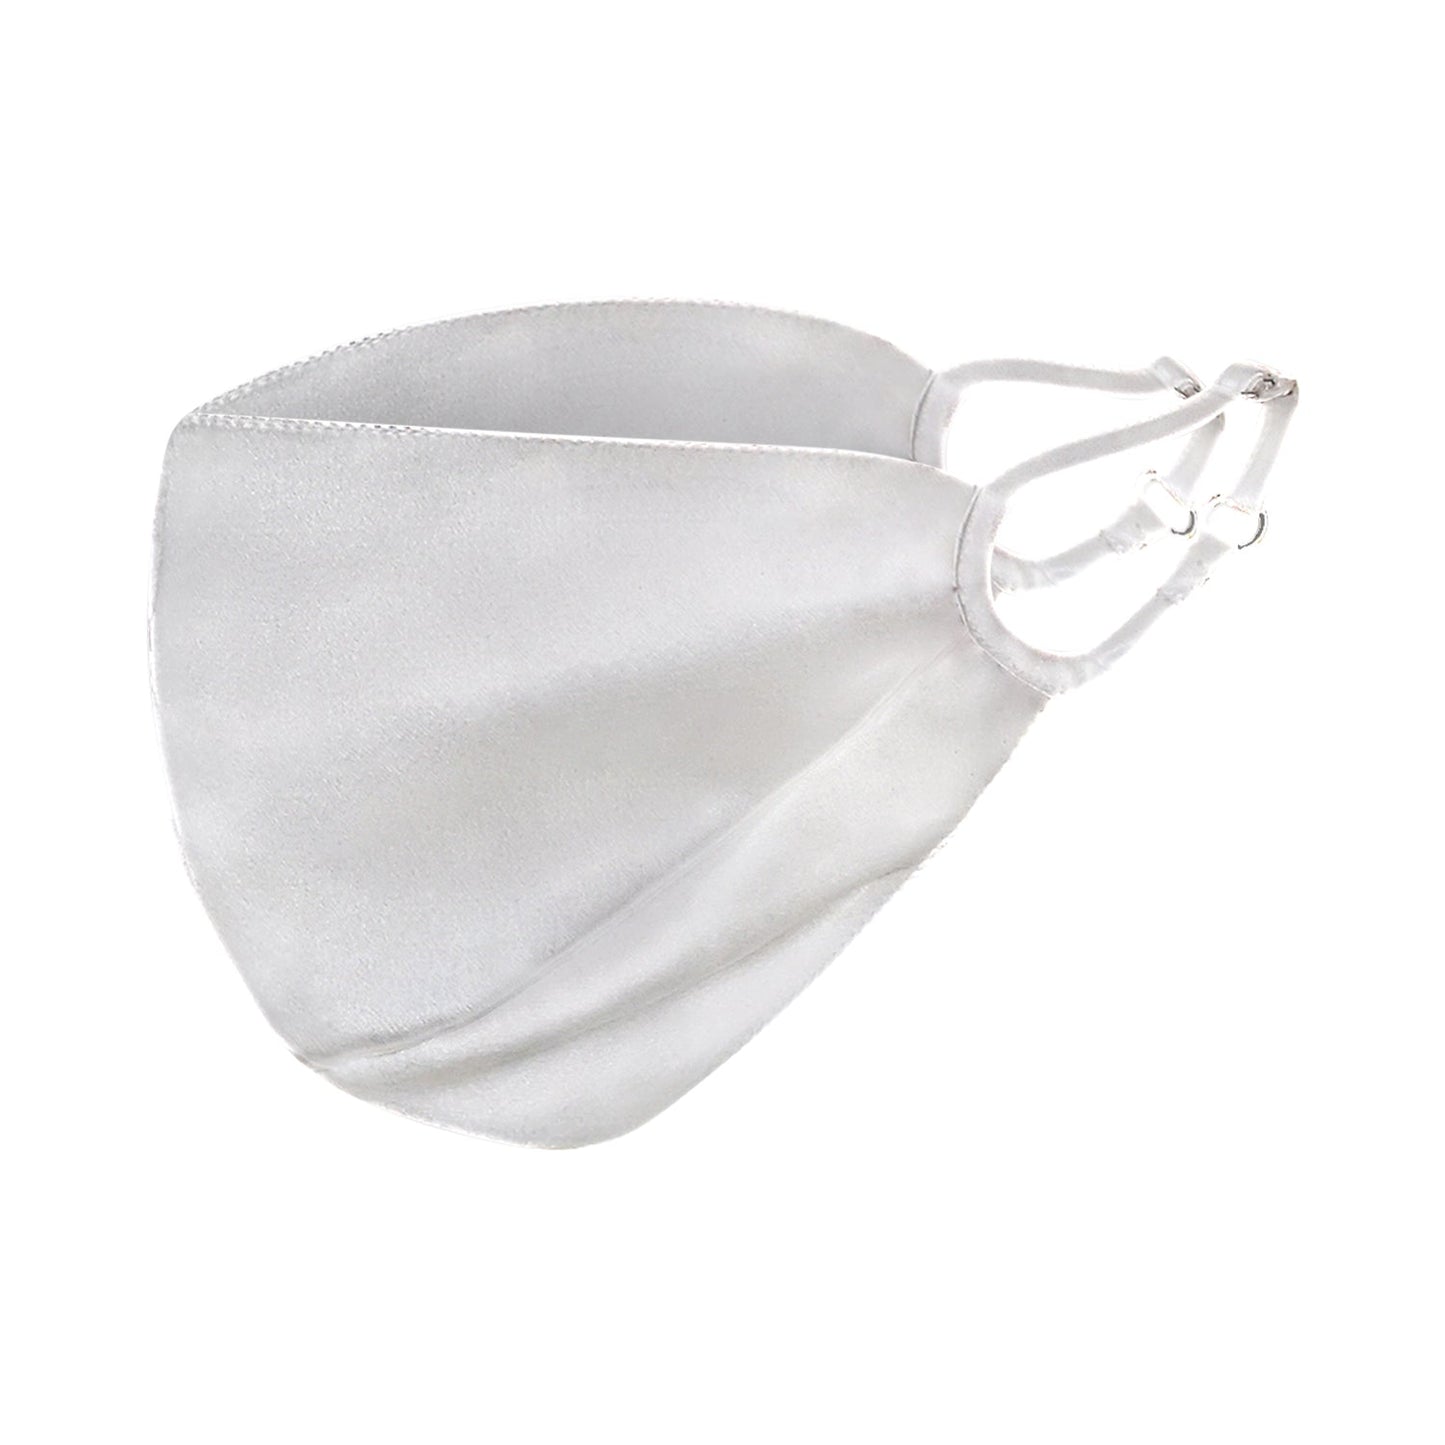 Complimentary Triple Layer Adjustable 100% Silk Face Mask w/ Filter Pocket & Nose Wire